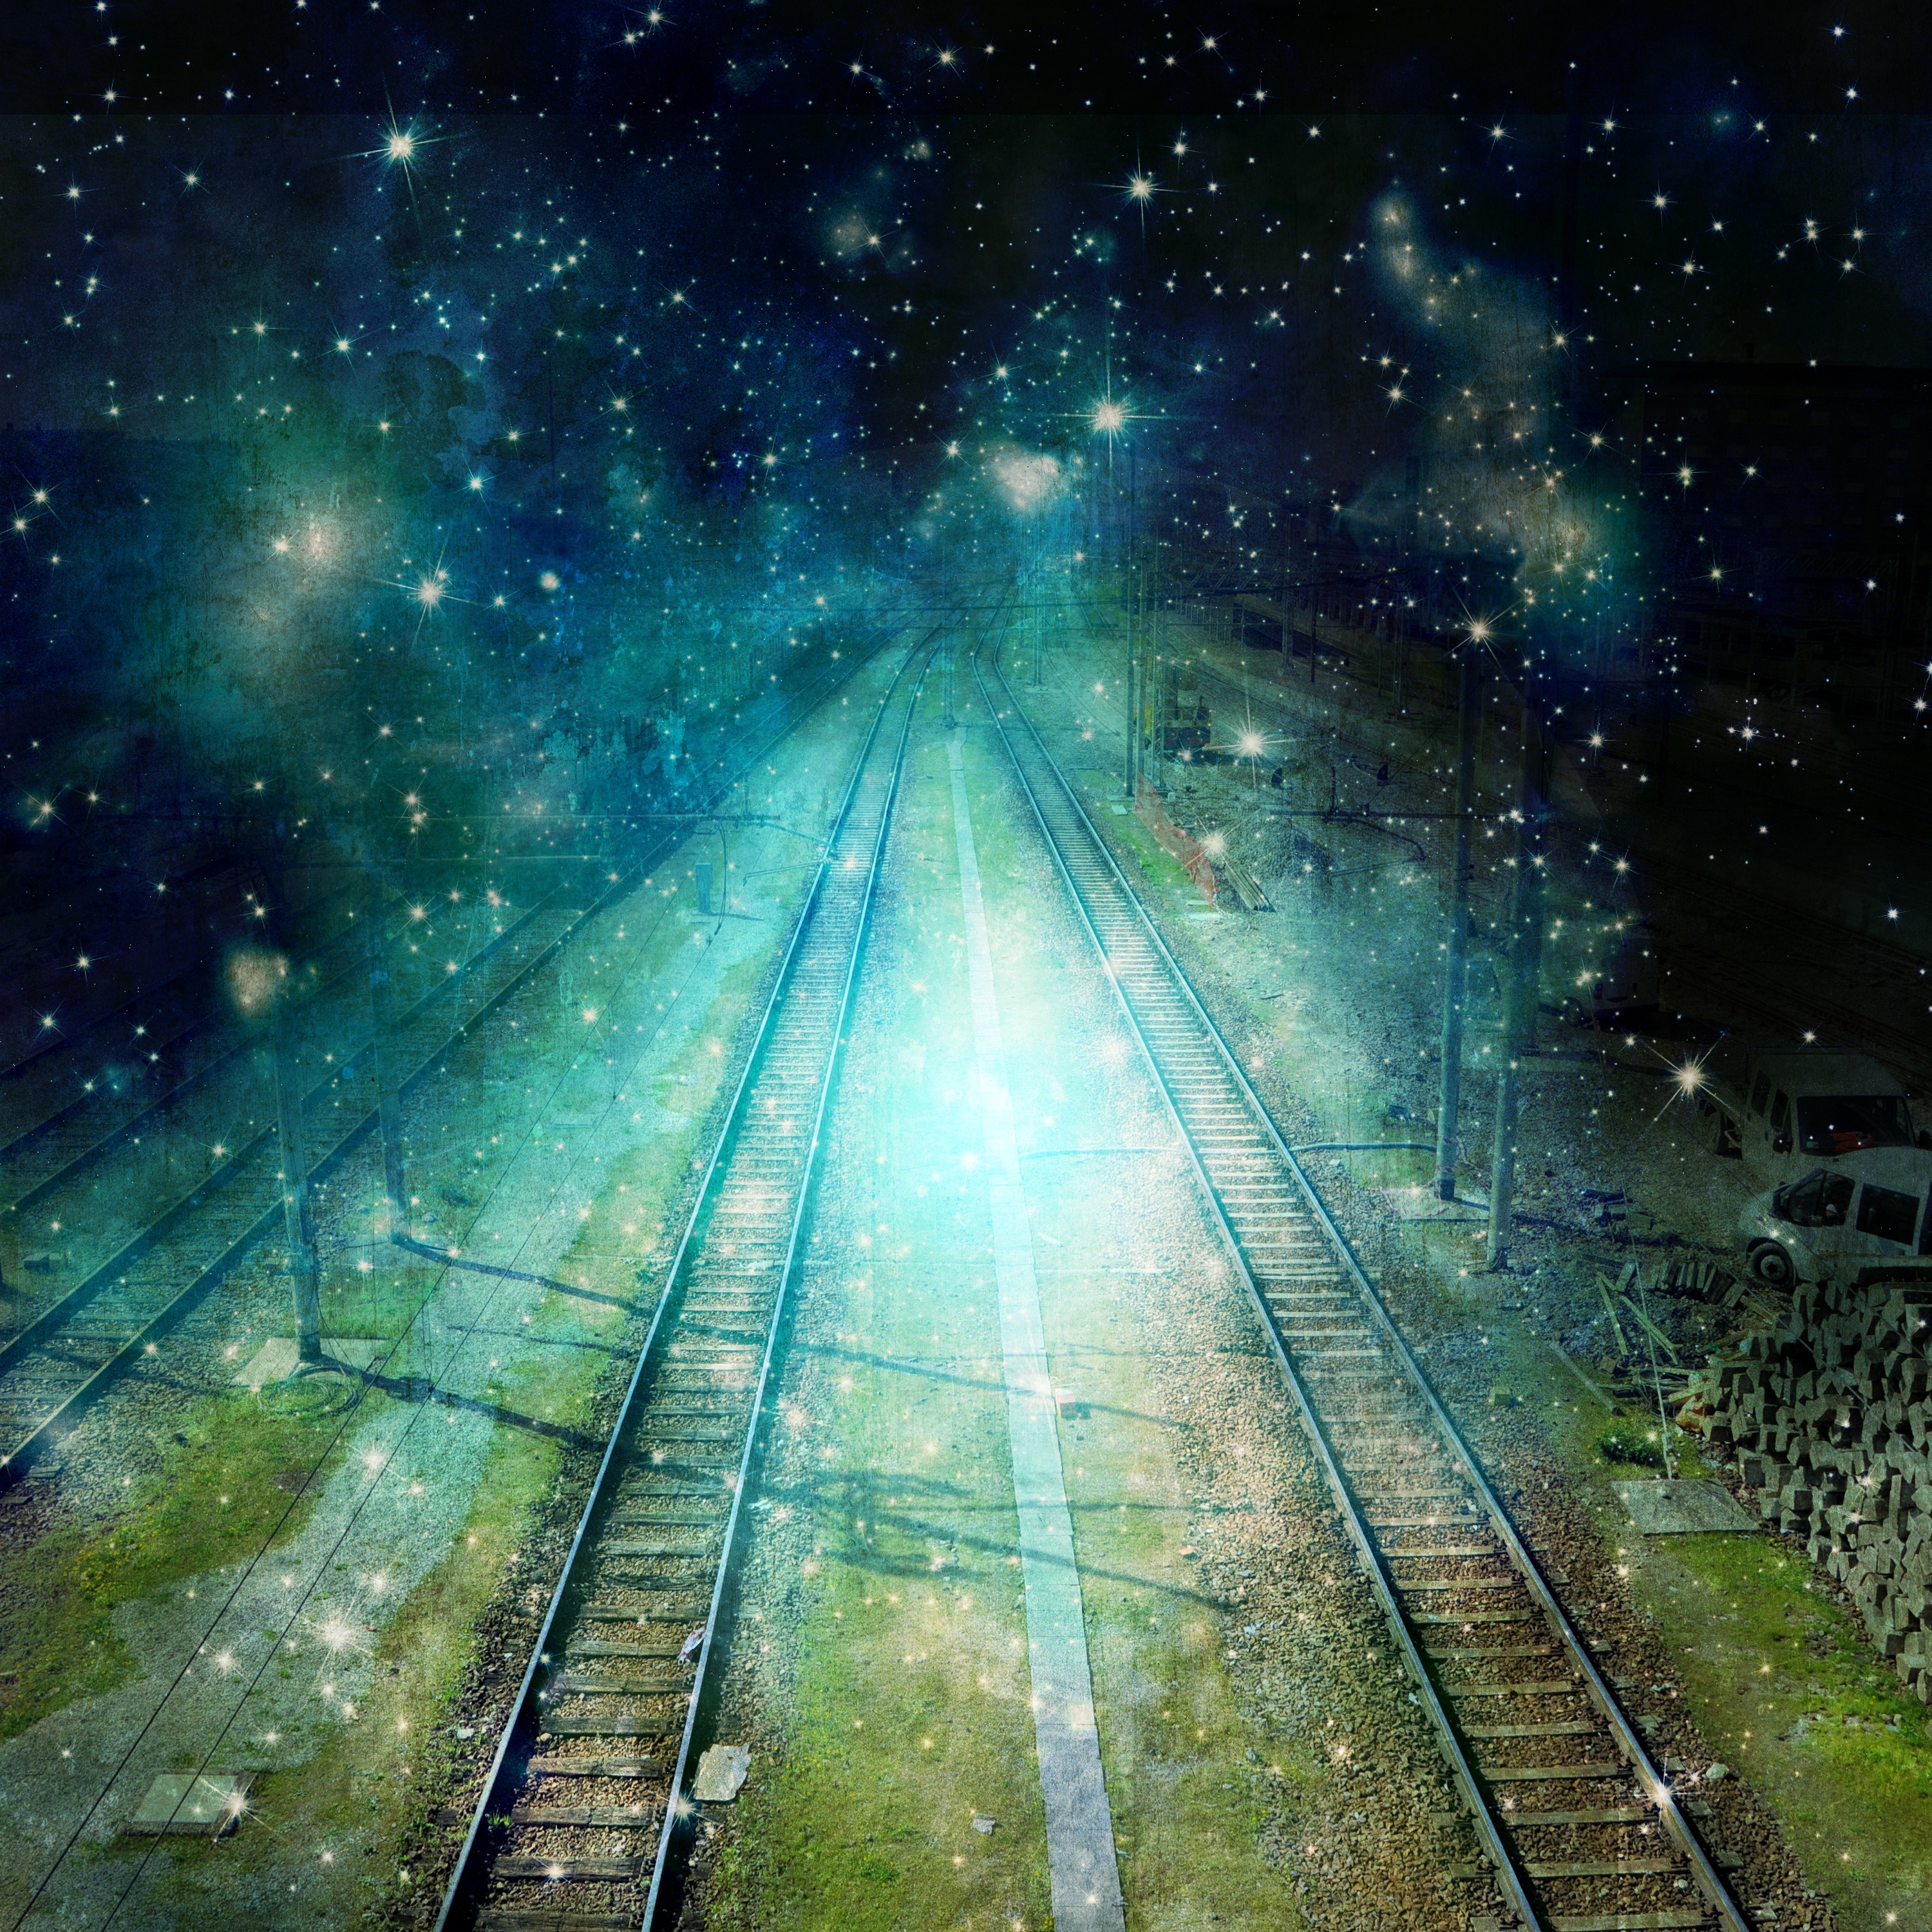 Surreal train tracks go towards the night with star light effect.